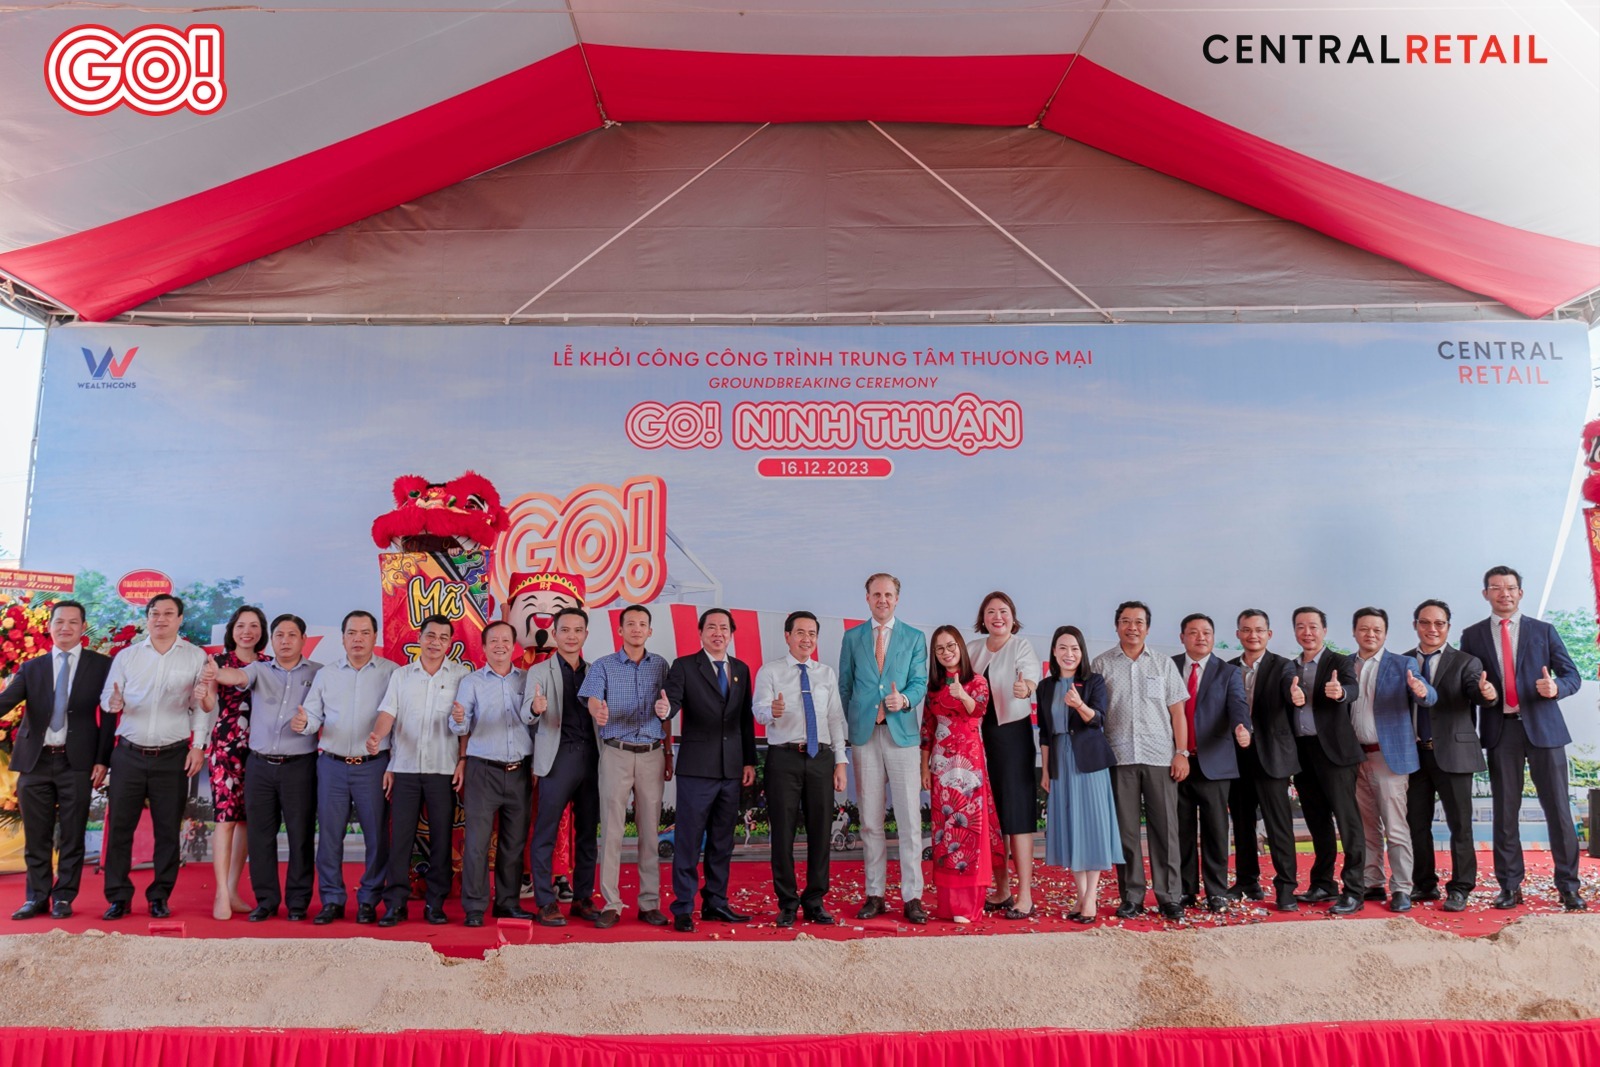 Central Retail organizes the Groundbreaking Ceremony of GO! Mall Ninh Thuan